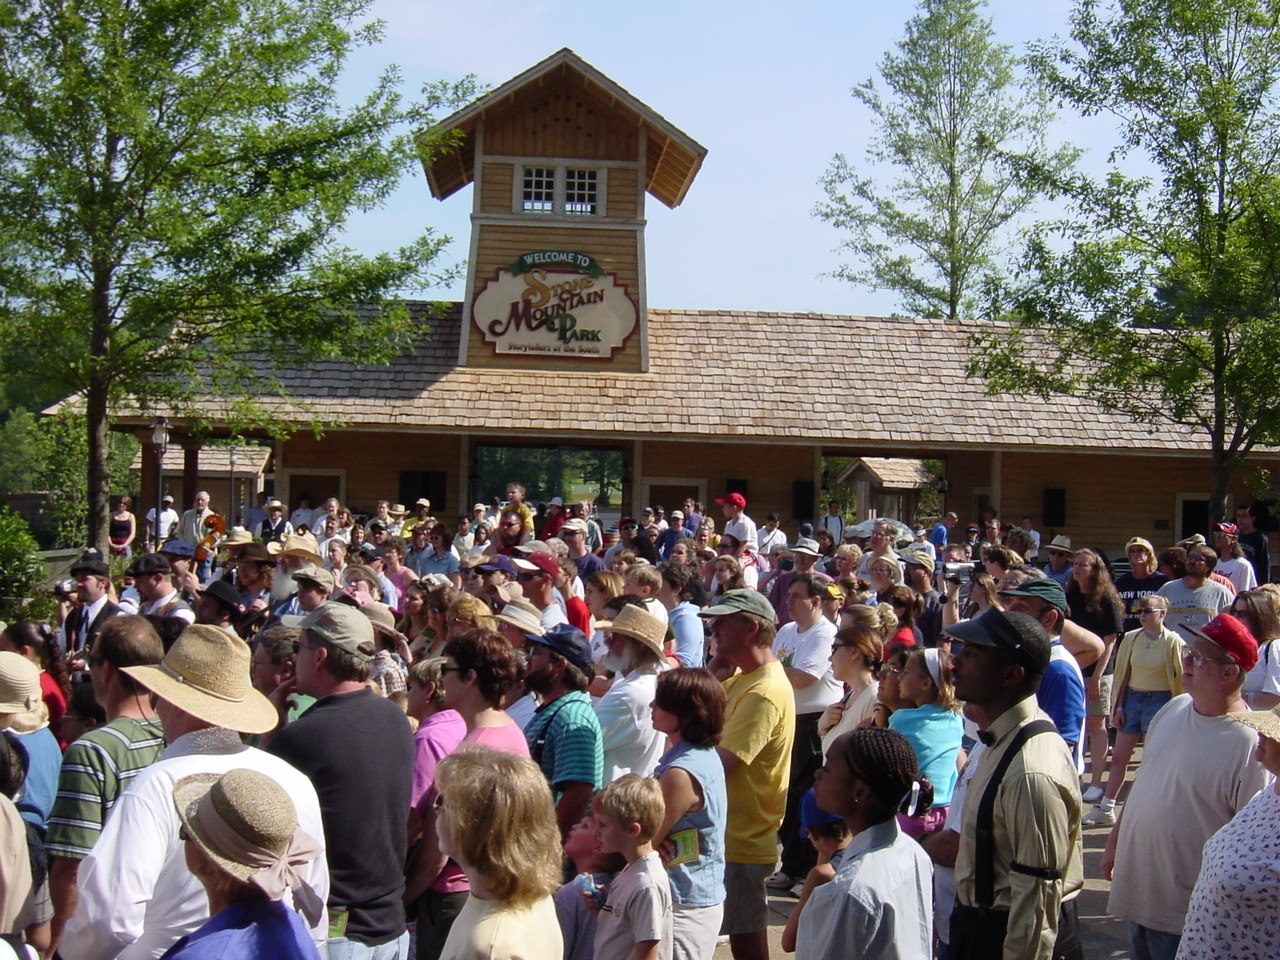 Guests at Stone Mountain Park. Herschend Enterprises will terminate its operations at the park when its lease ends in 2022.